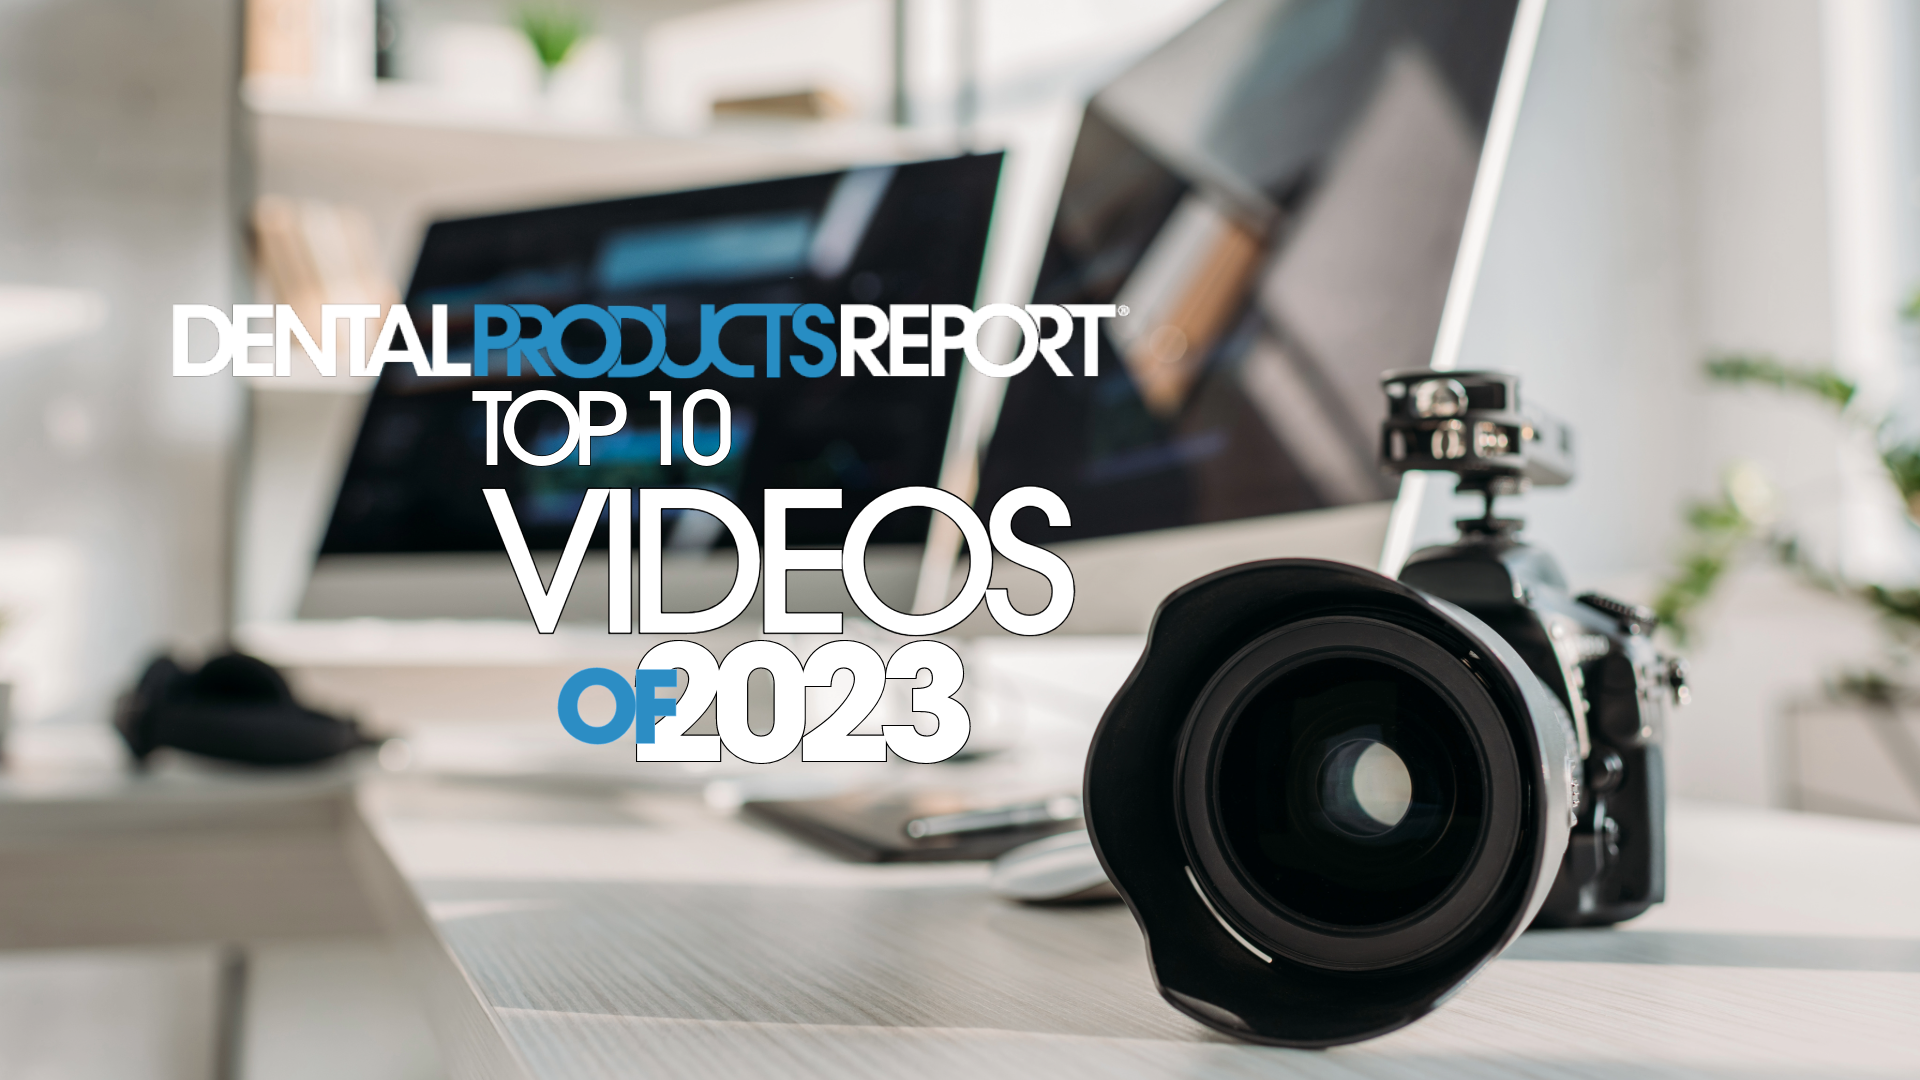 Top 10 Dental Products Report Videos of 2023